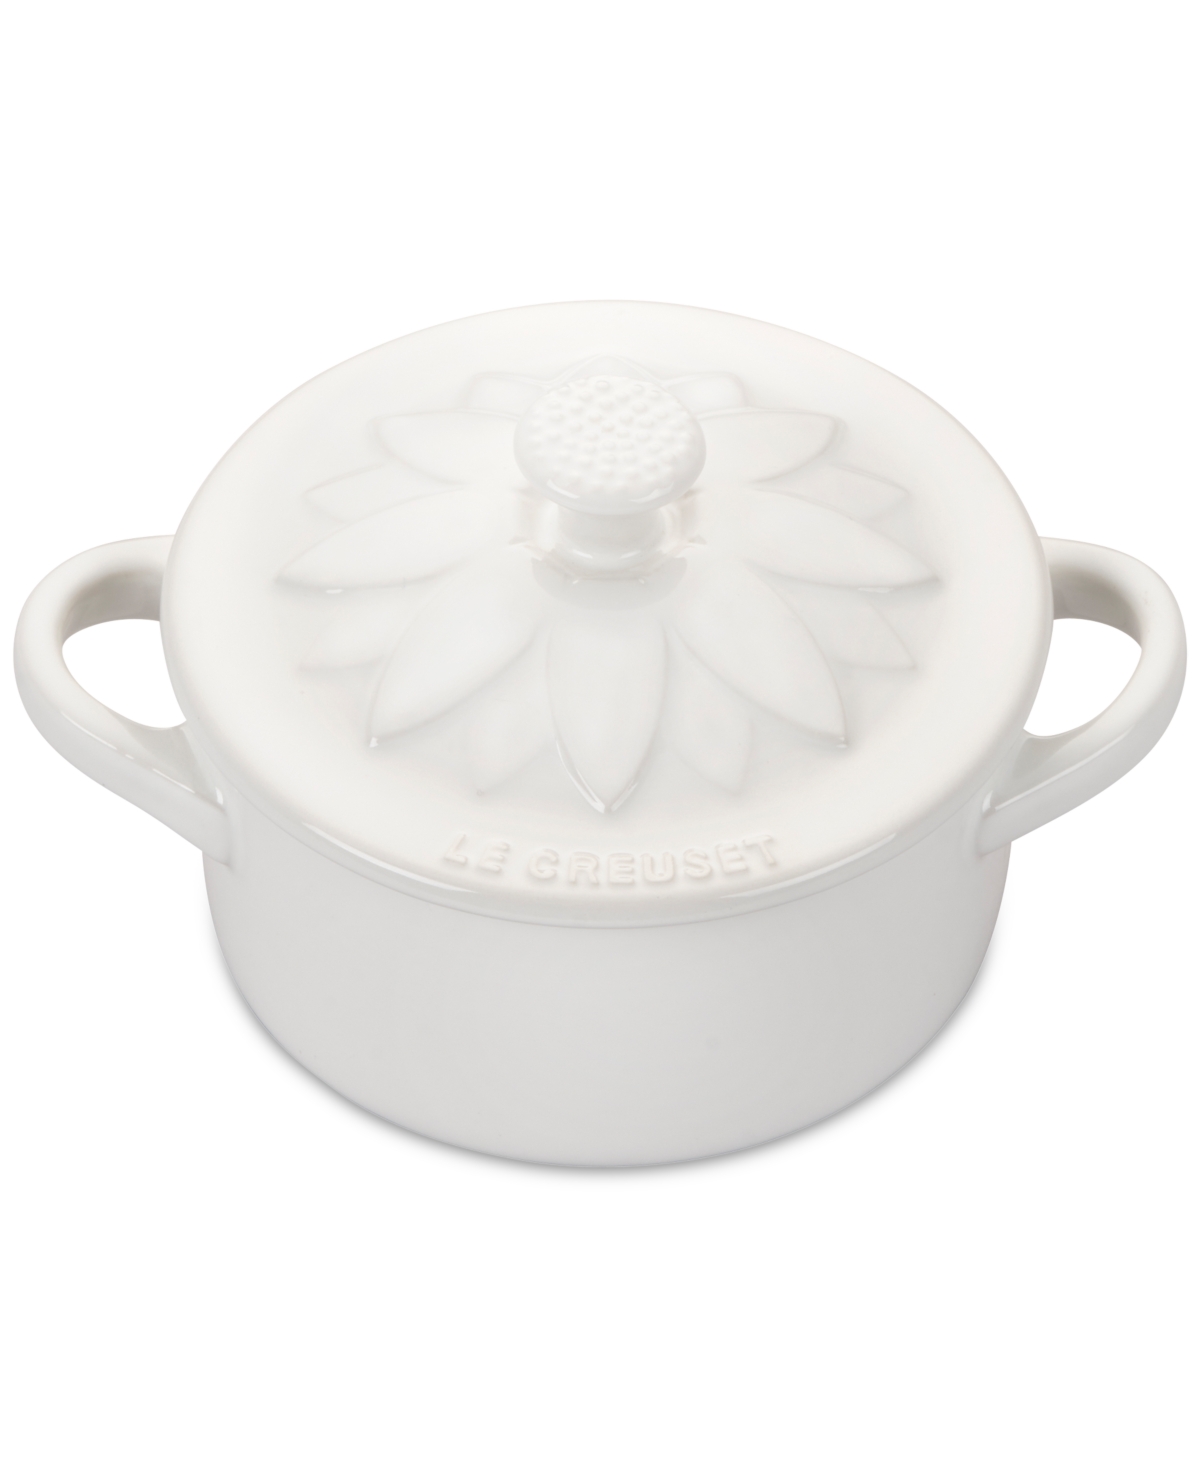 Le Creuset Stoneware 8 Oz. Flower Mini Cocotte With Lid In White